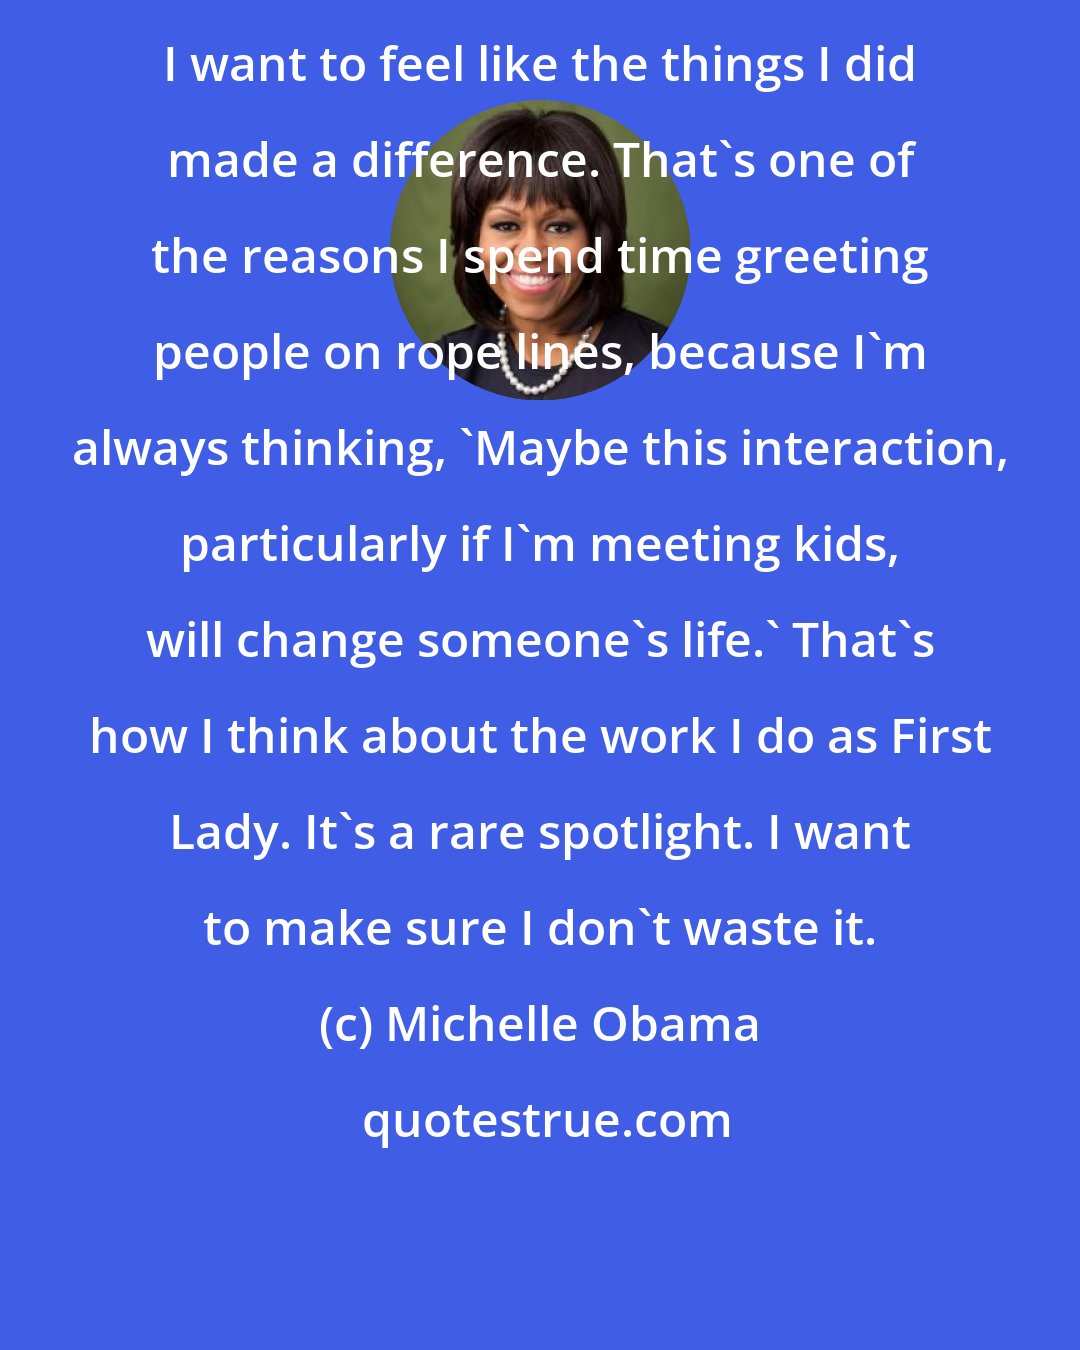 Michelle Obama: I want to feel like the things I did made a difference. That's one of the reasons I spend time greeting people on rope lines, because I'm always thinking, 'Maybe this interaction, particularly if I'm meeting kids, will change someone's life.' That's how I think about the work I do as First Lady. It's a rare spotlight. I want to make sure I don't waste it.